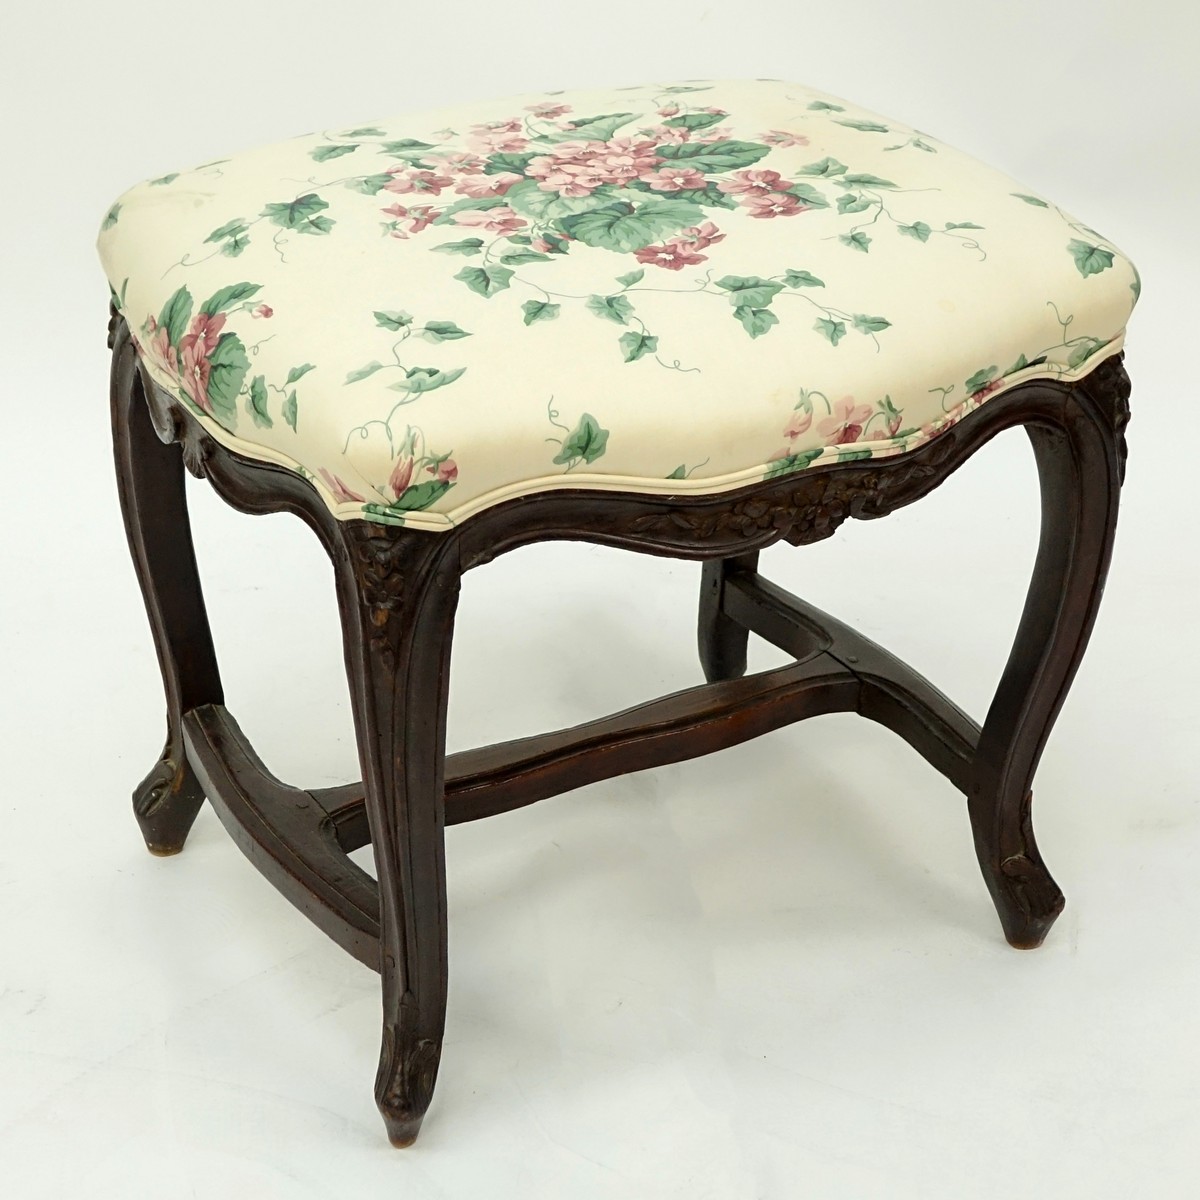 19th Century Louis XV French Carved Wood and Upholstered Tabouret Stool. Scratches to wood. Measure